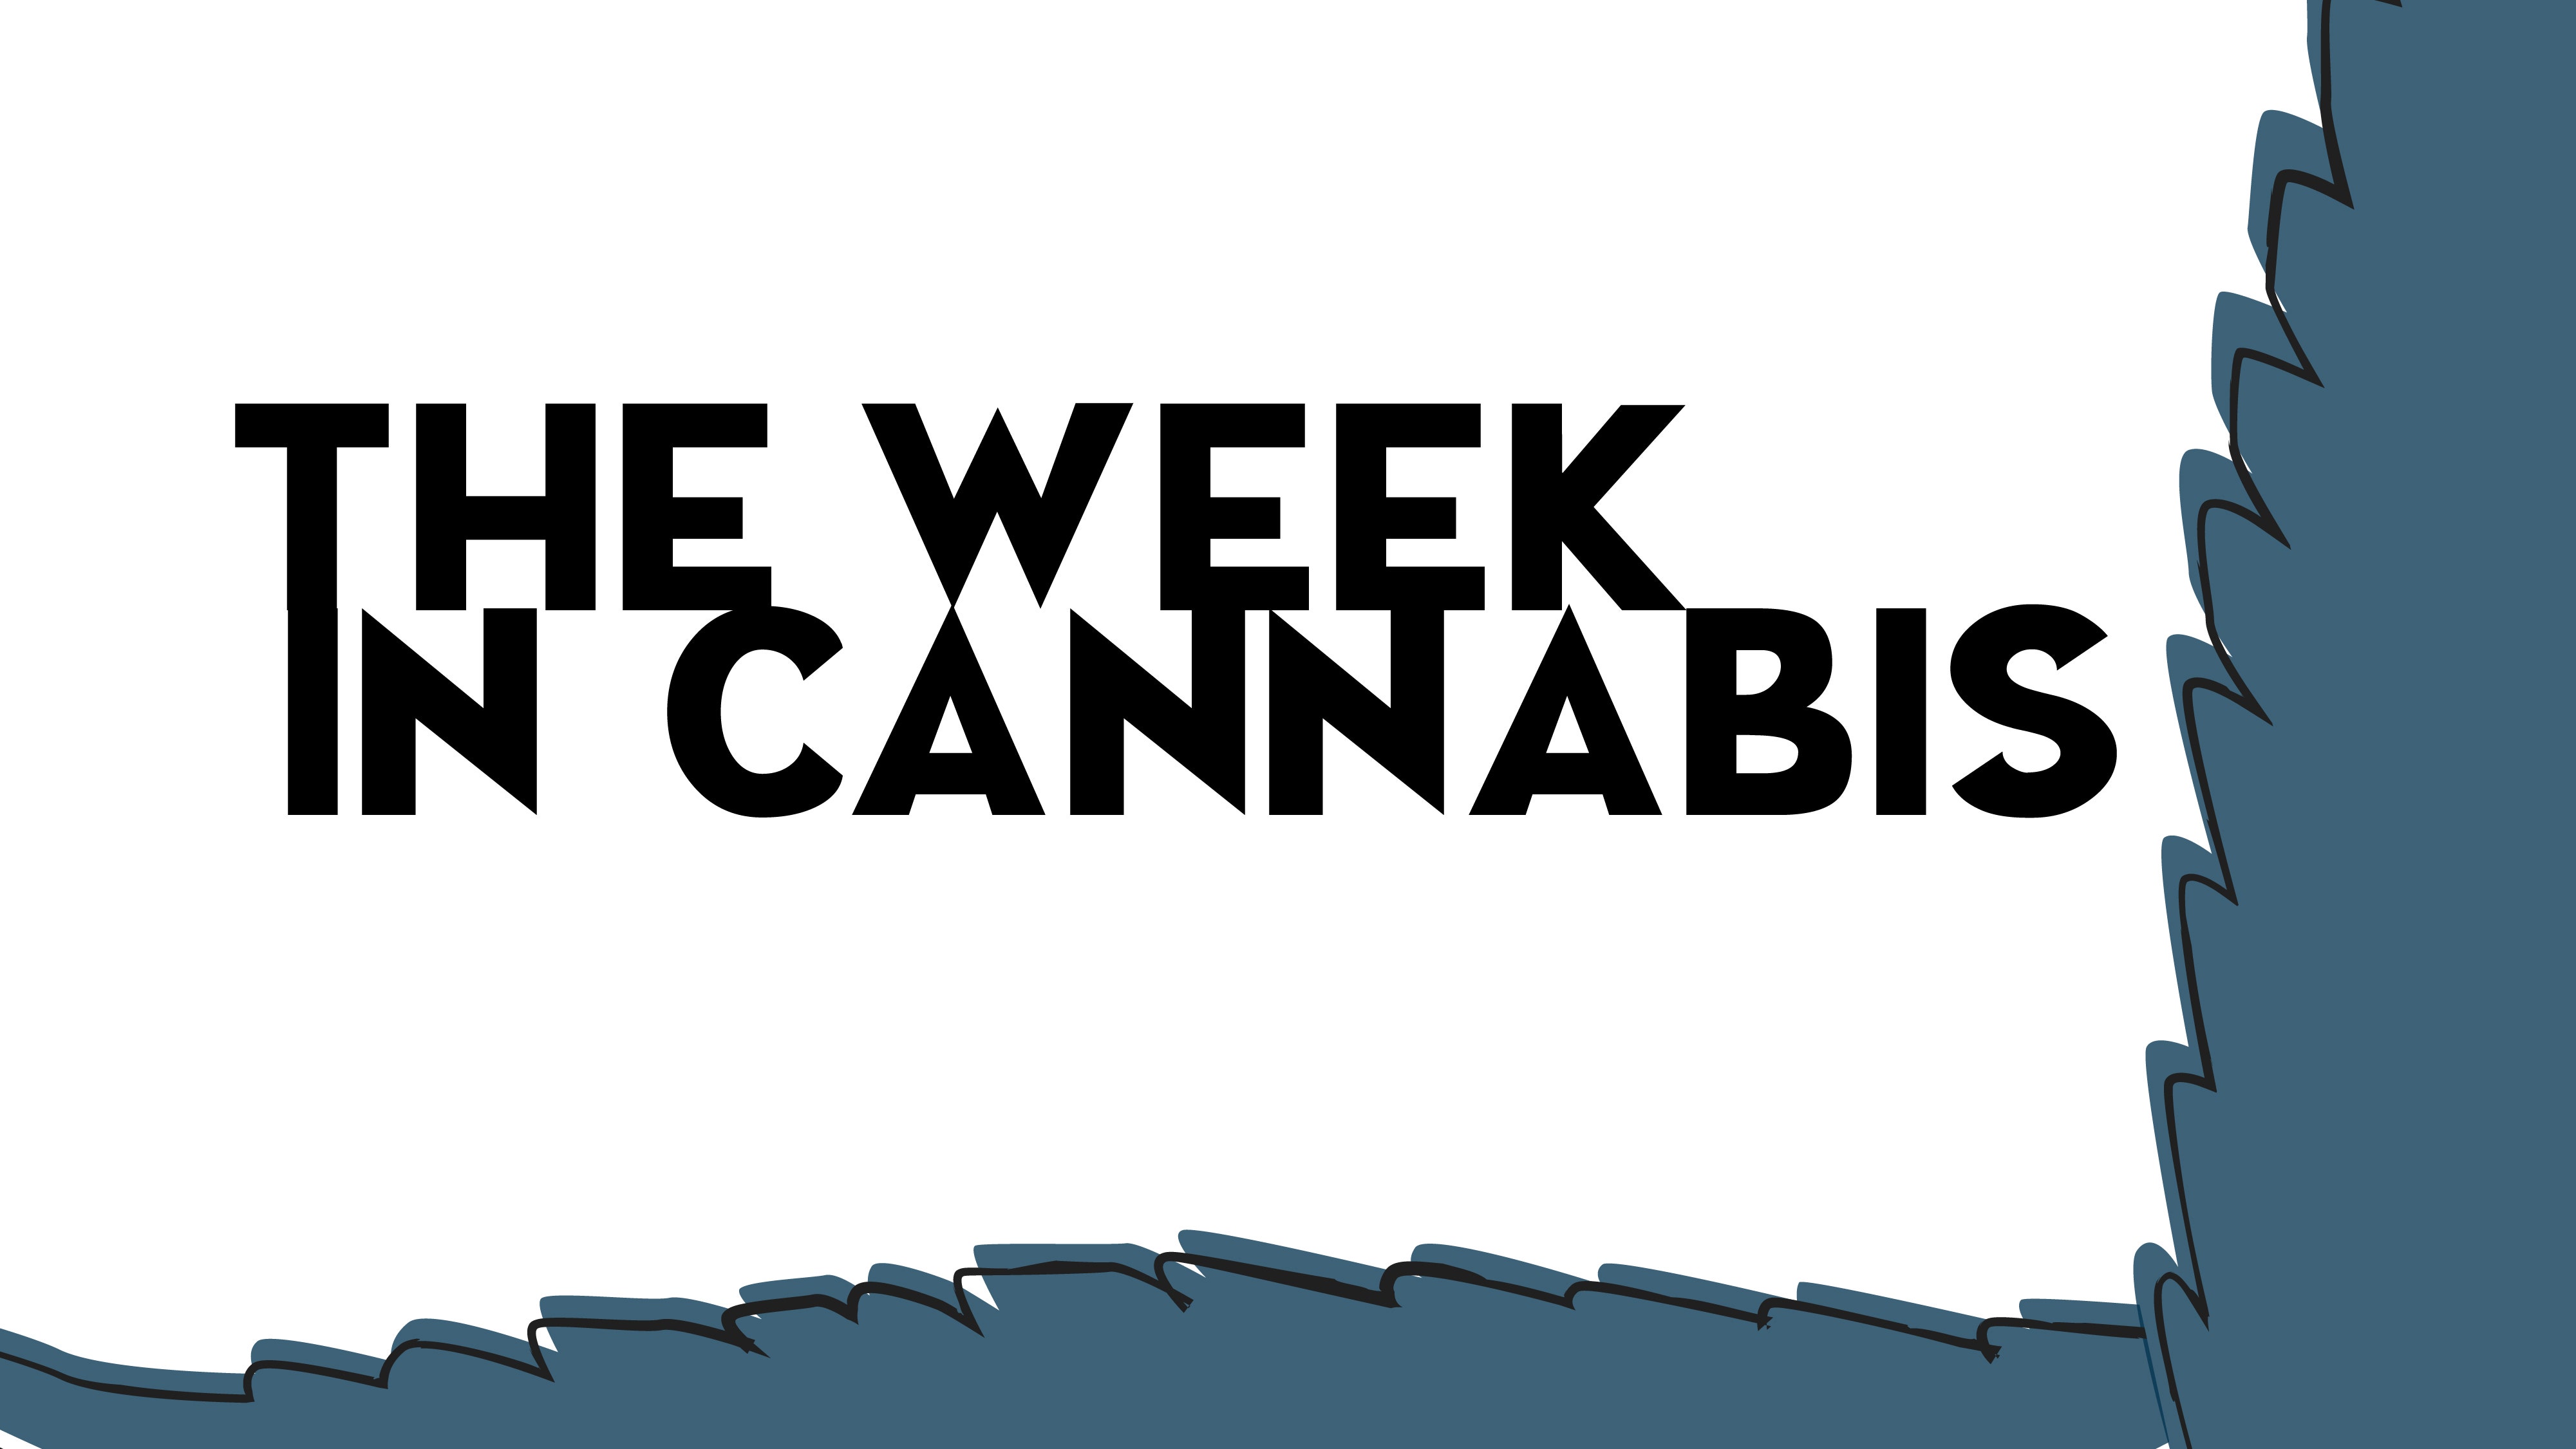 The Week In Cannabis: Stocks Down, Republican Legalization Bill, Germany, Uruguay, Earnings, New ETF And More